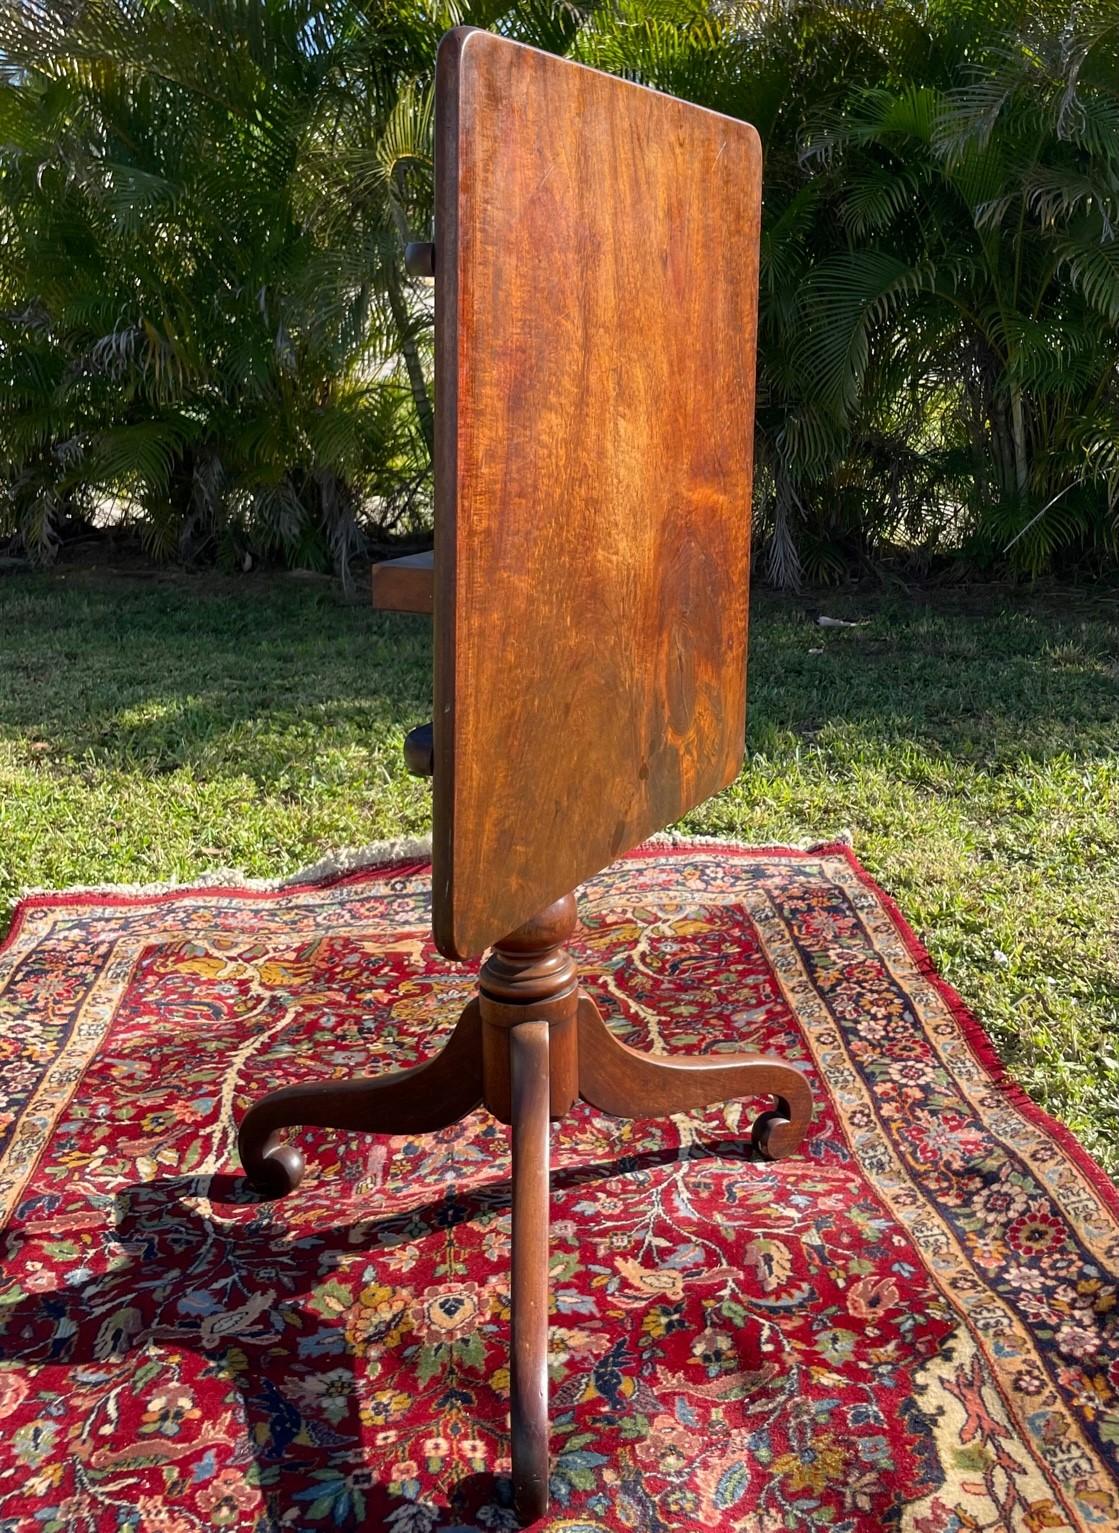 English George ll mahogany rectangulartripod tilt top tea table c.1790.

An exceptionally rare late 18th century mahogany rectangular tripod tilt-top table. The larger size qualifies it as a tea table. The top is resting upon a turned pedestal with